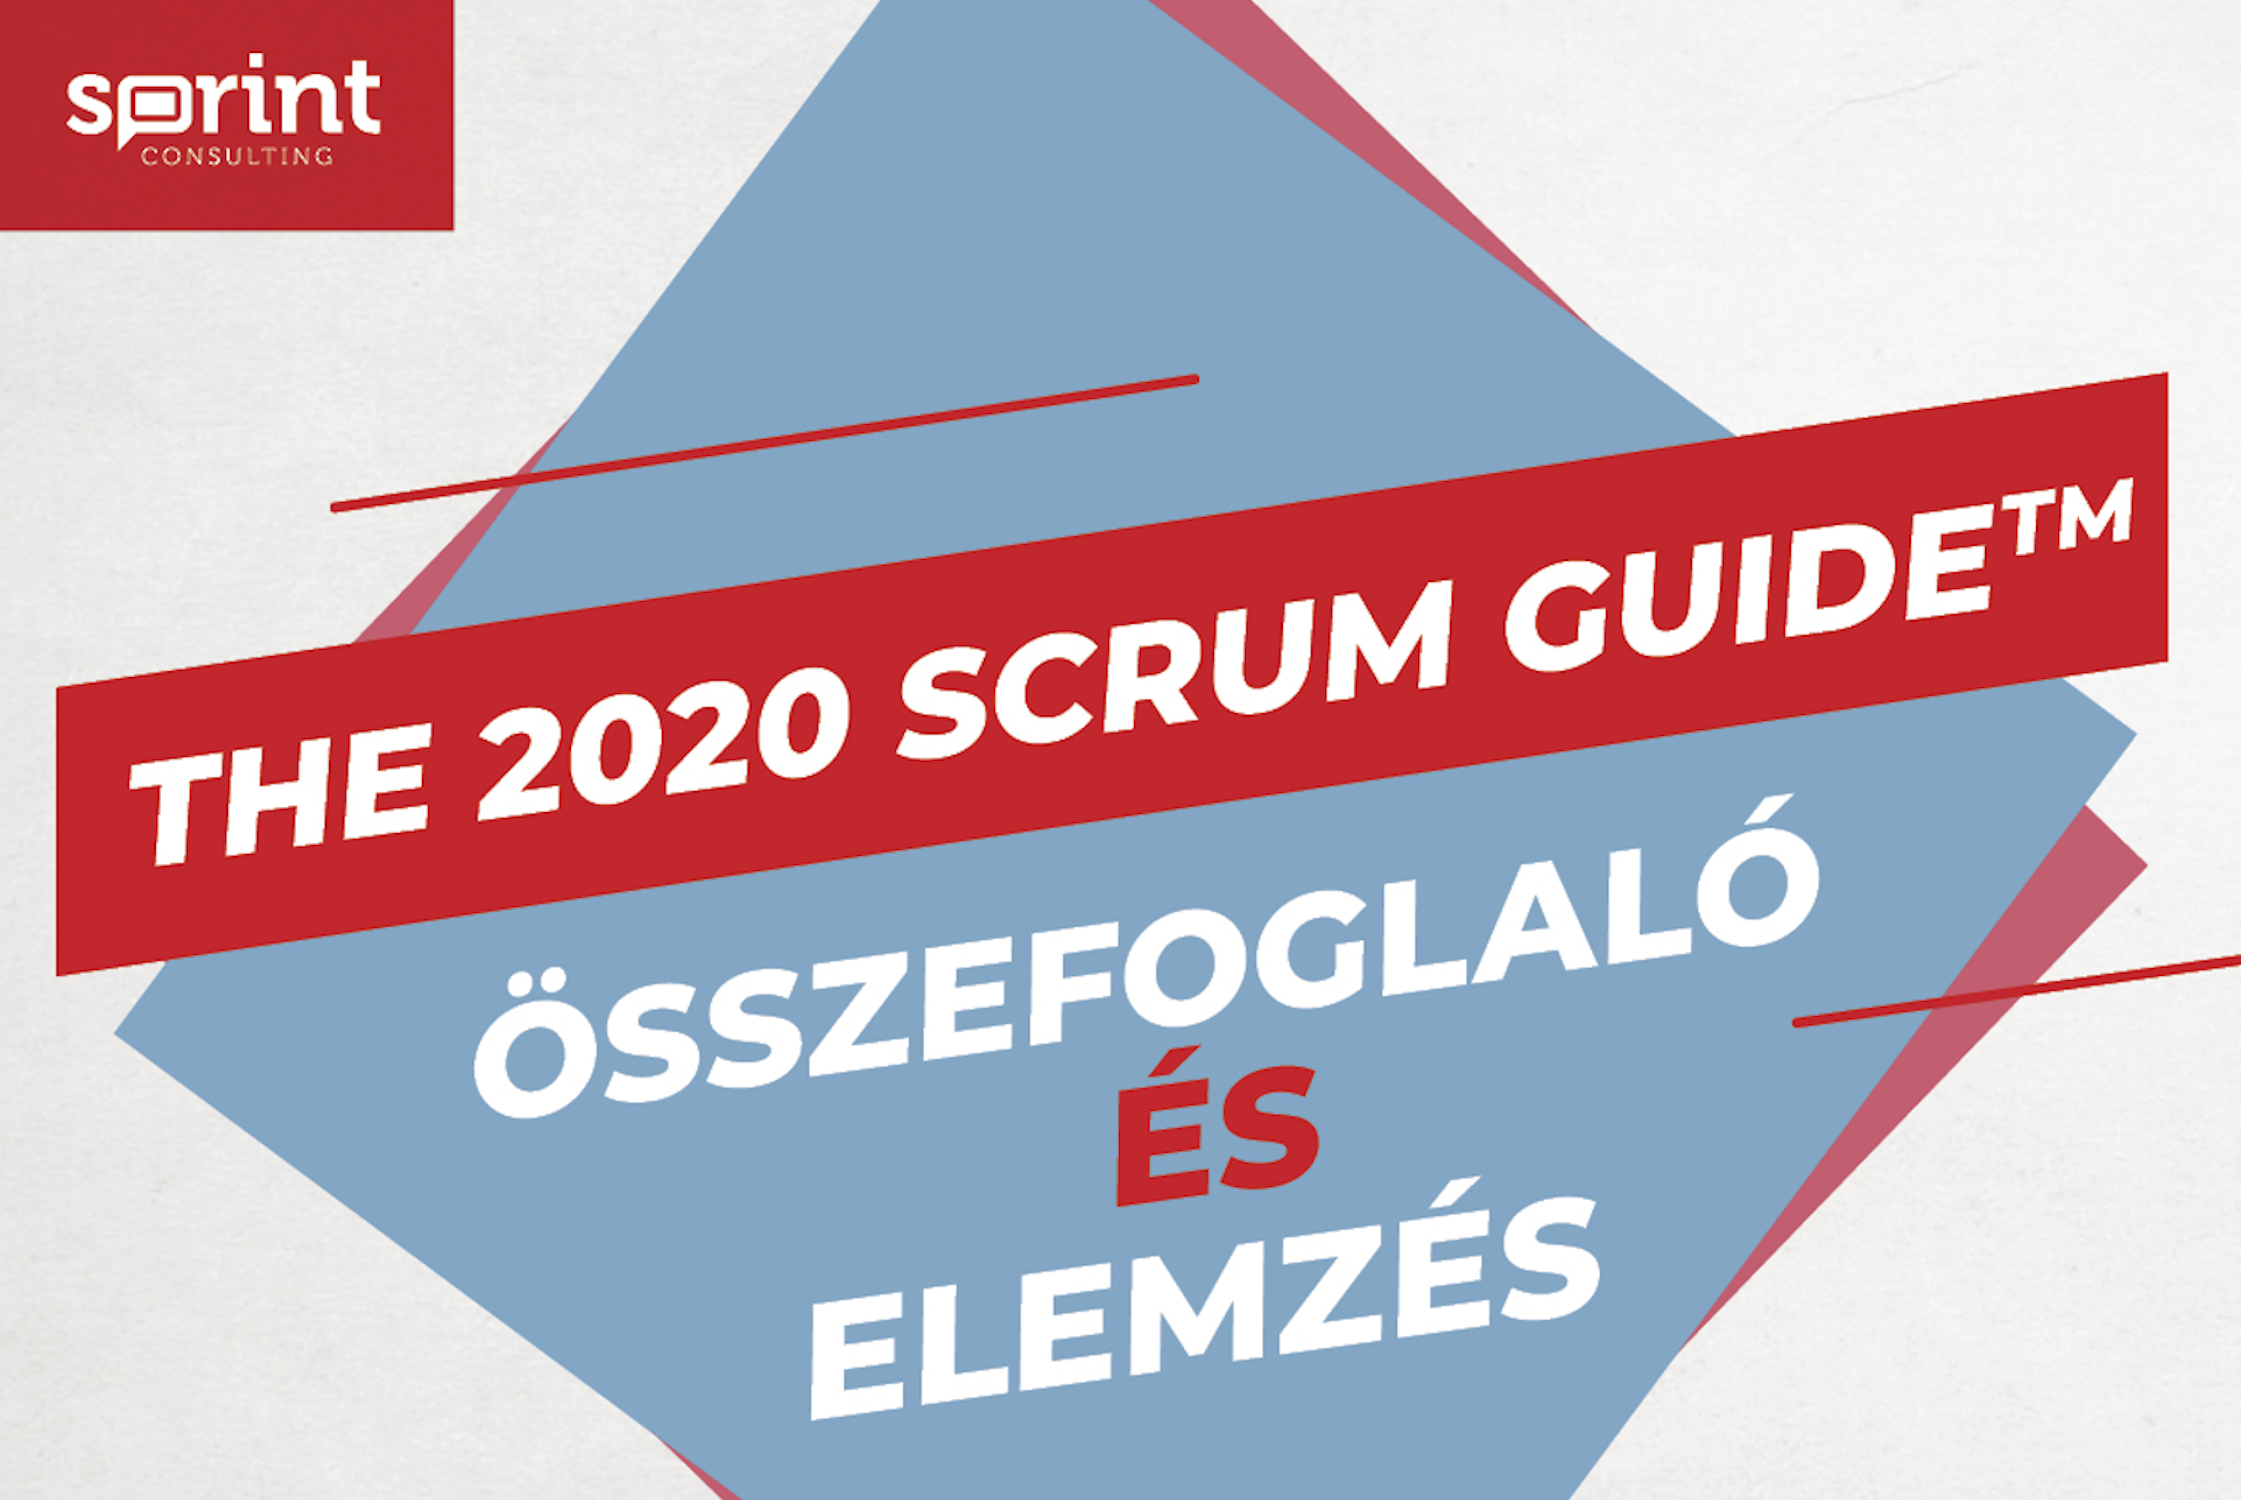 How has Scrum changed with the release of the new 2020 Scrum Guide?